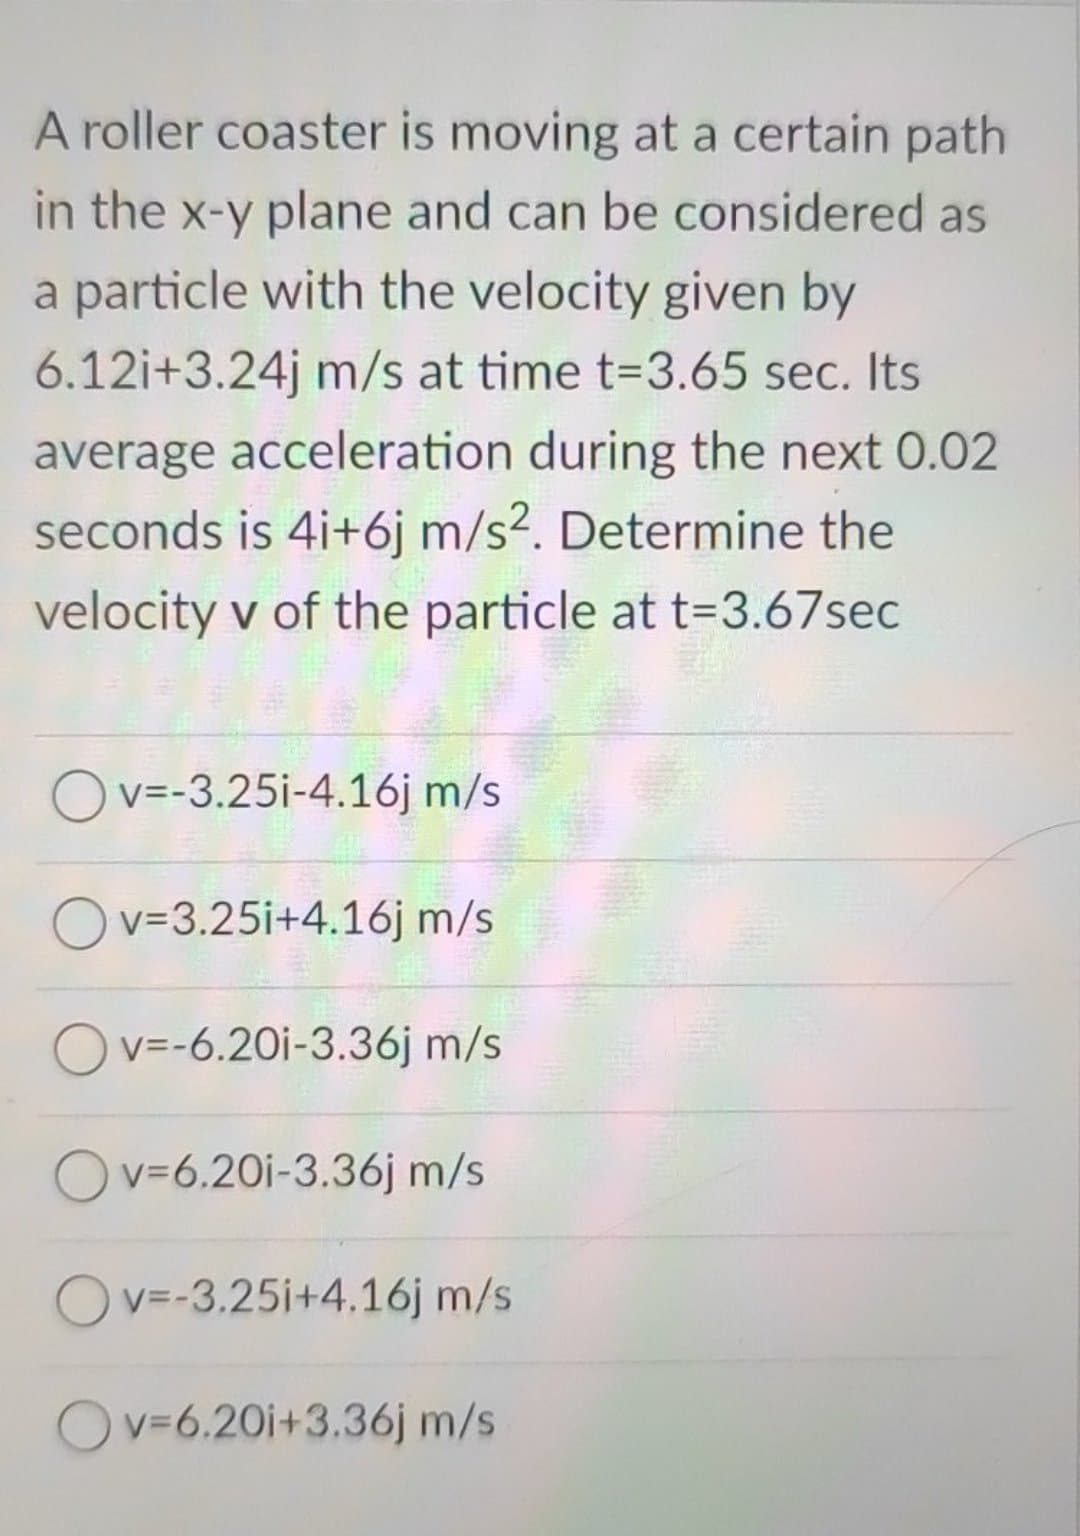 A roller coaster is moving at a certain path
in the x-y plane and can be considered as
a particle with the velocity given by
6.12i+3.24j m/s at time t-3.65 sec. Its
average acceleration during the next 0.02
seconds is 4i+6j m/s2. Determine the
velocity v of the particle at t=3.67sec
Ov=-3.25i-4.16j m/s
Ov=3.25i+4.16j m/s
v=-6.20i-3.36j m/s
Ov=6.20i-3.36j m/s
Ov=-3.25i+4.16j m/s
Ov=6.20i+3.36j m/s
